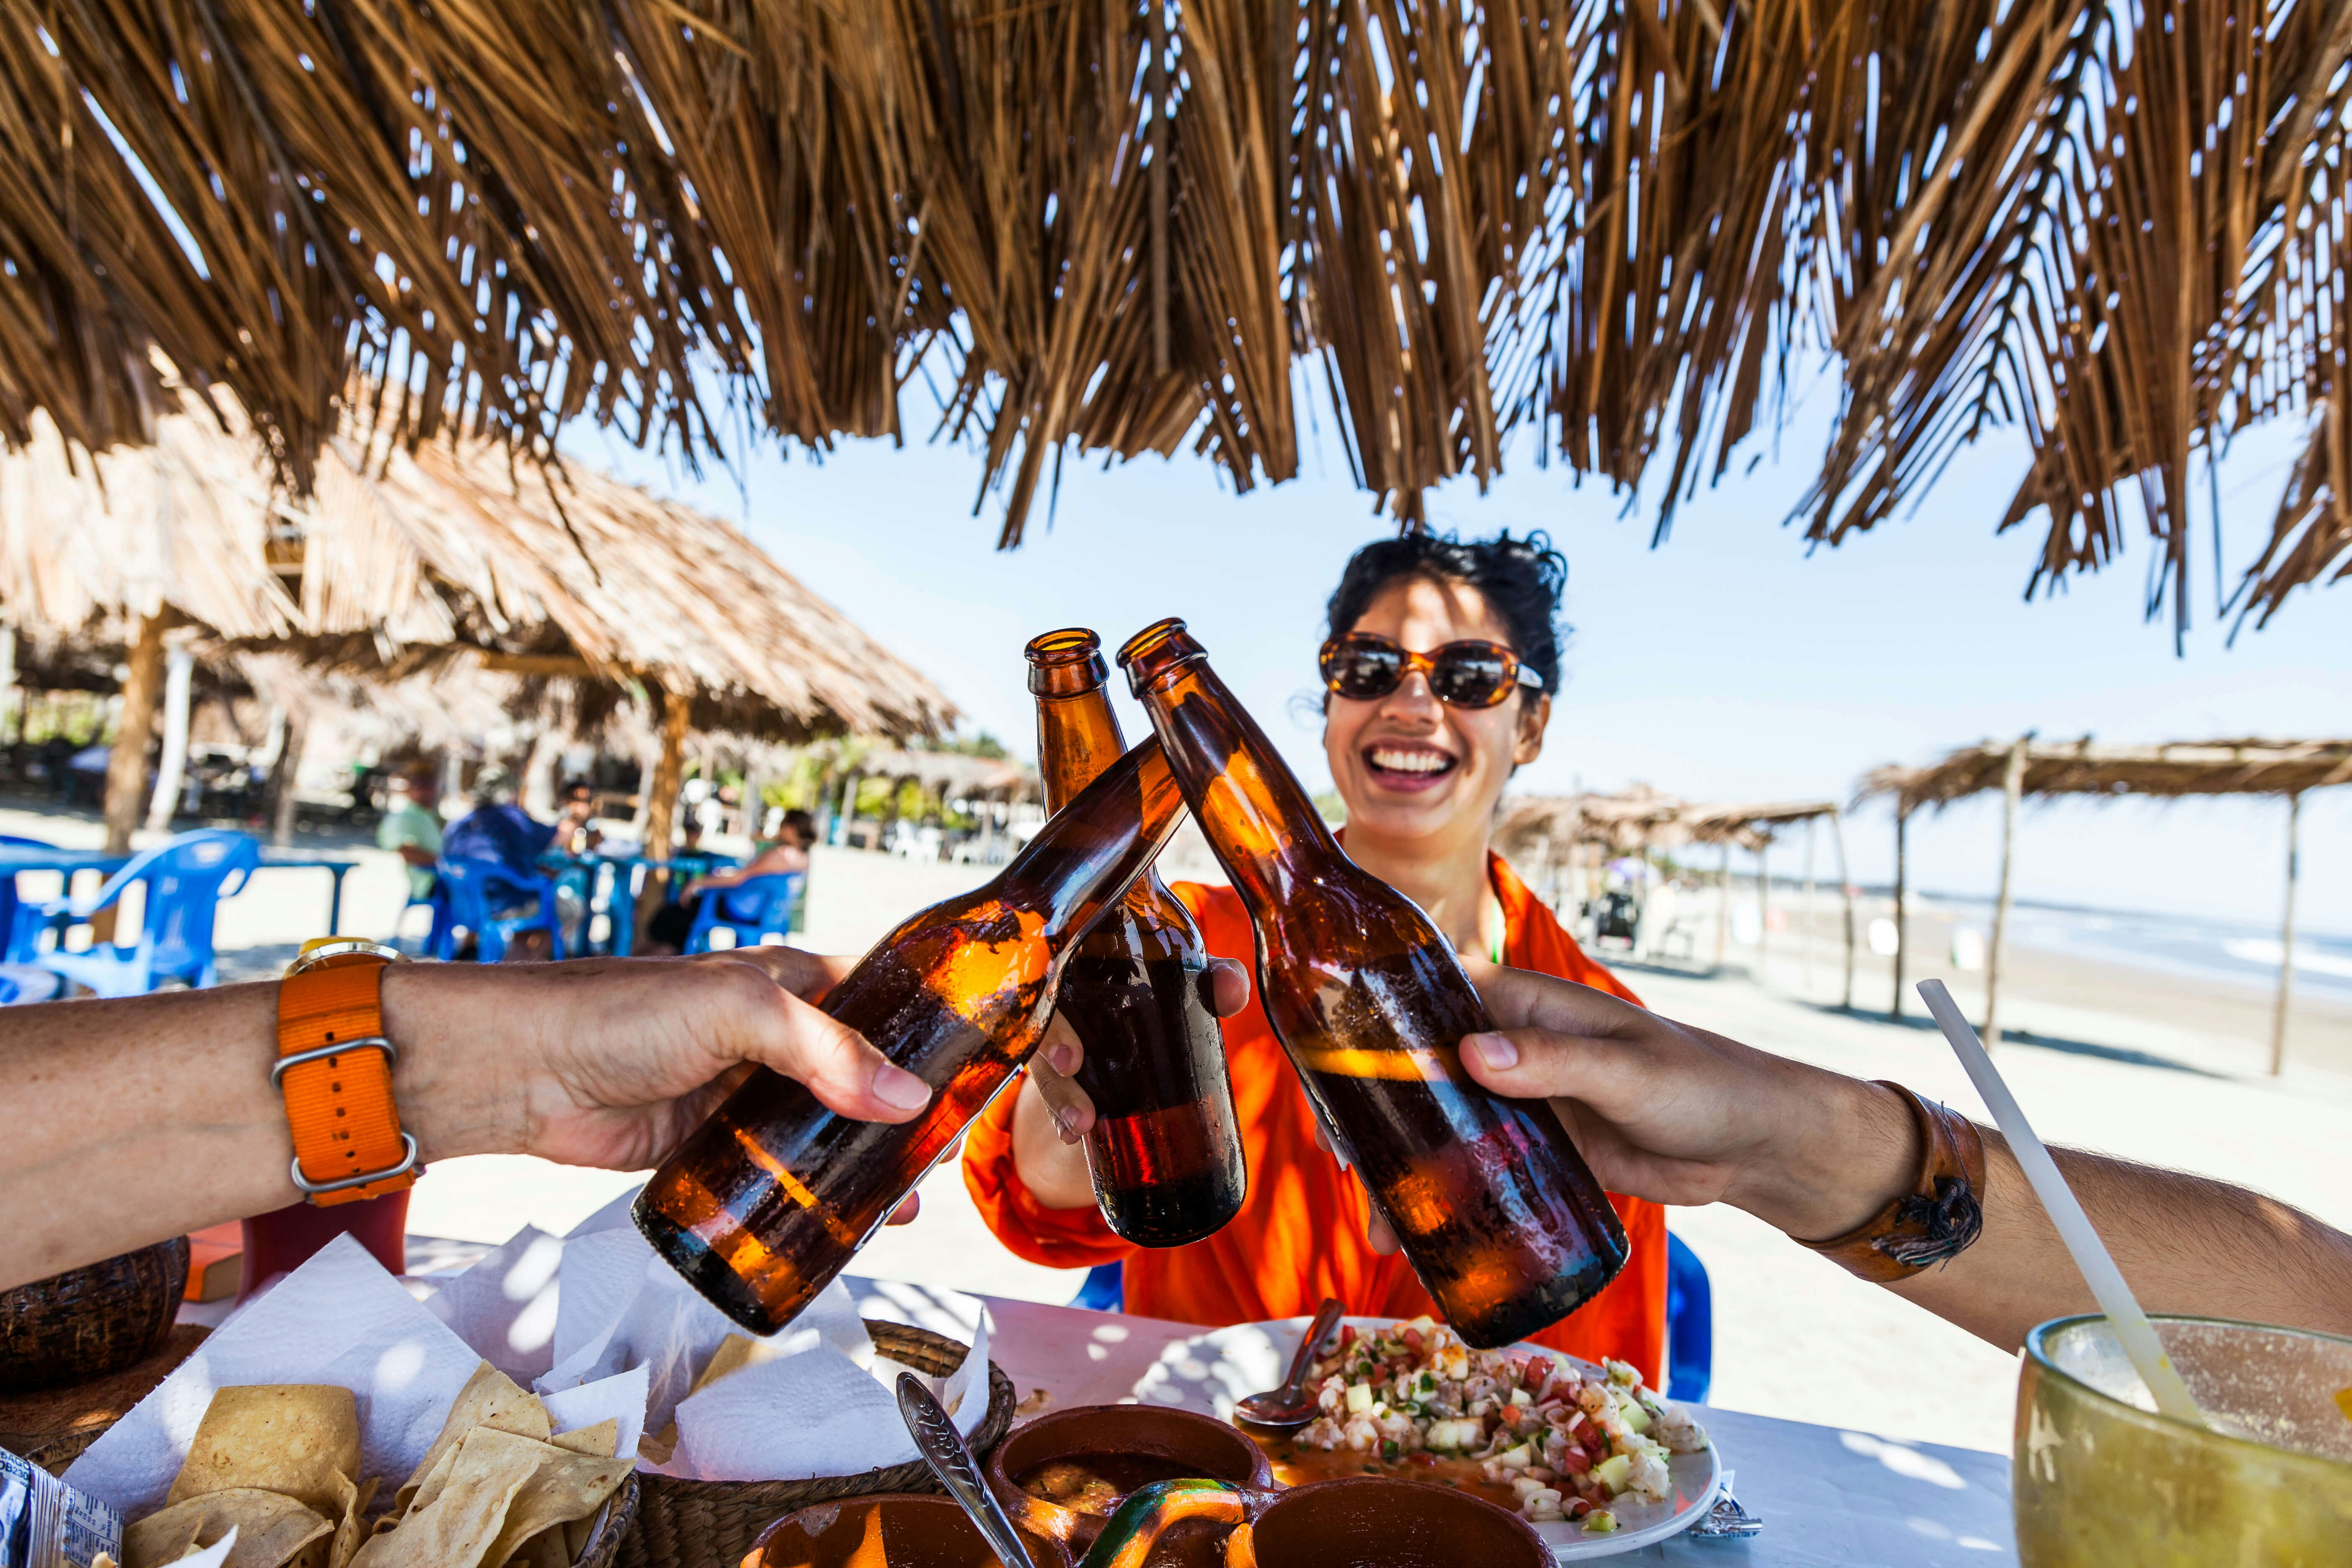 Having a meal under a beach palapa in Mexico - stock photo
A Spanish woman in her early twenties laughing as she toasts good health on a beach in Mexico.